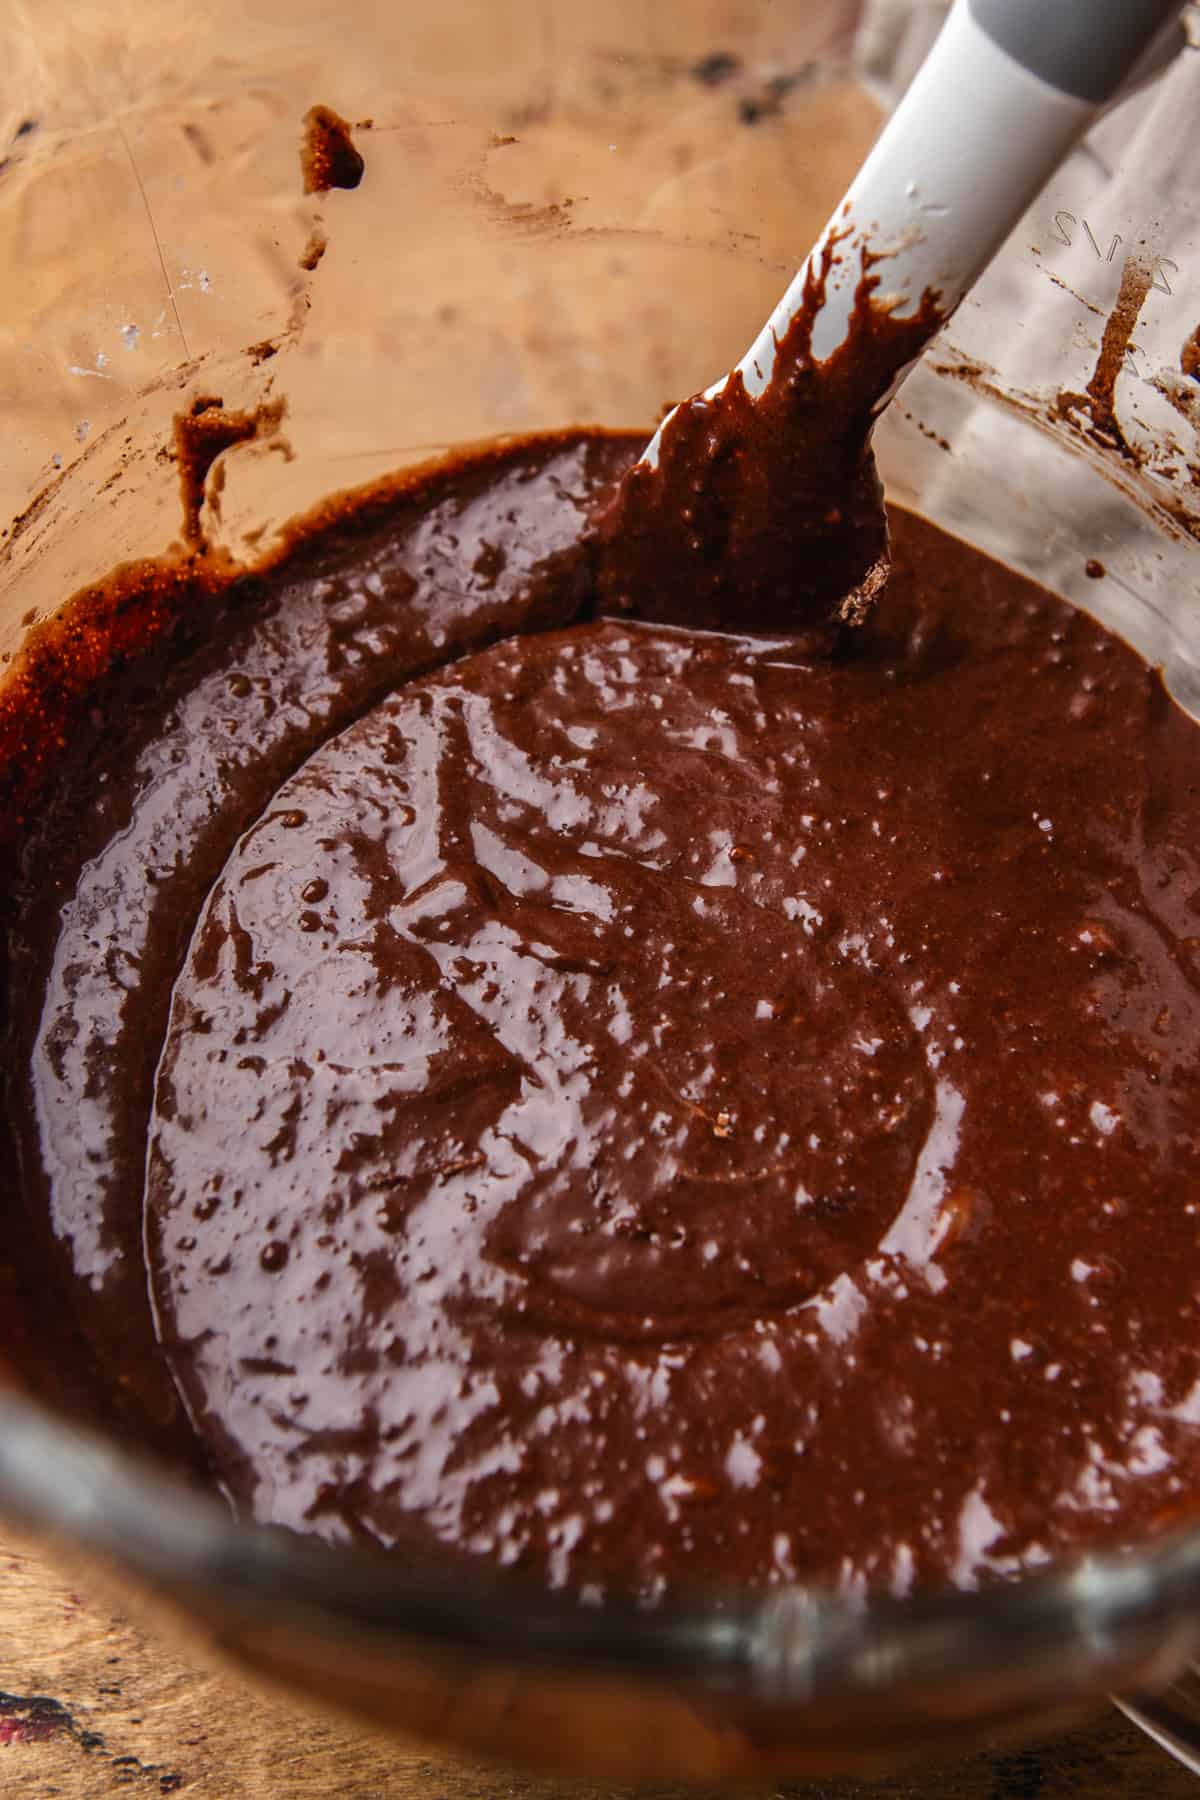 Mixing wet ingredients to make chocolate cake batter in a bowl.